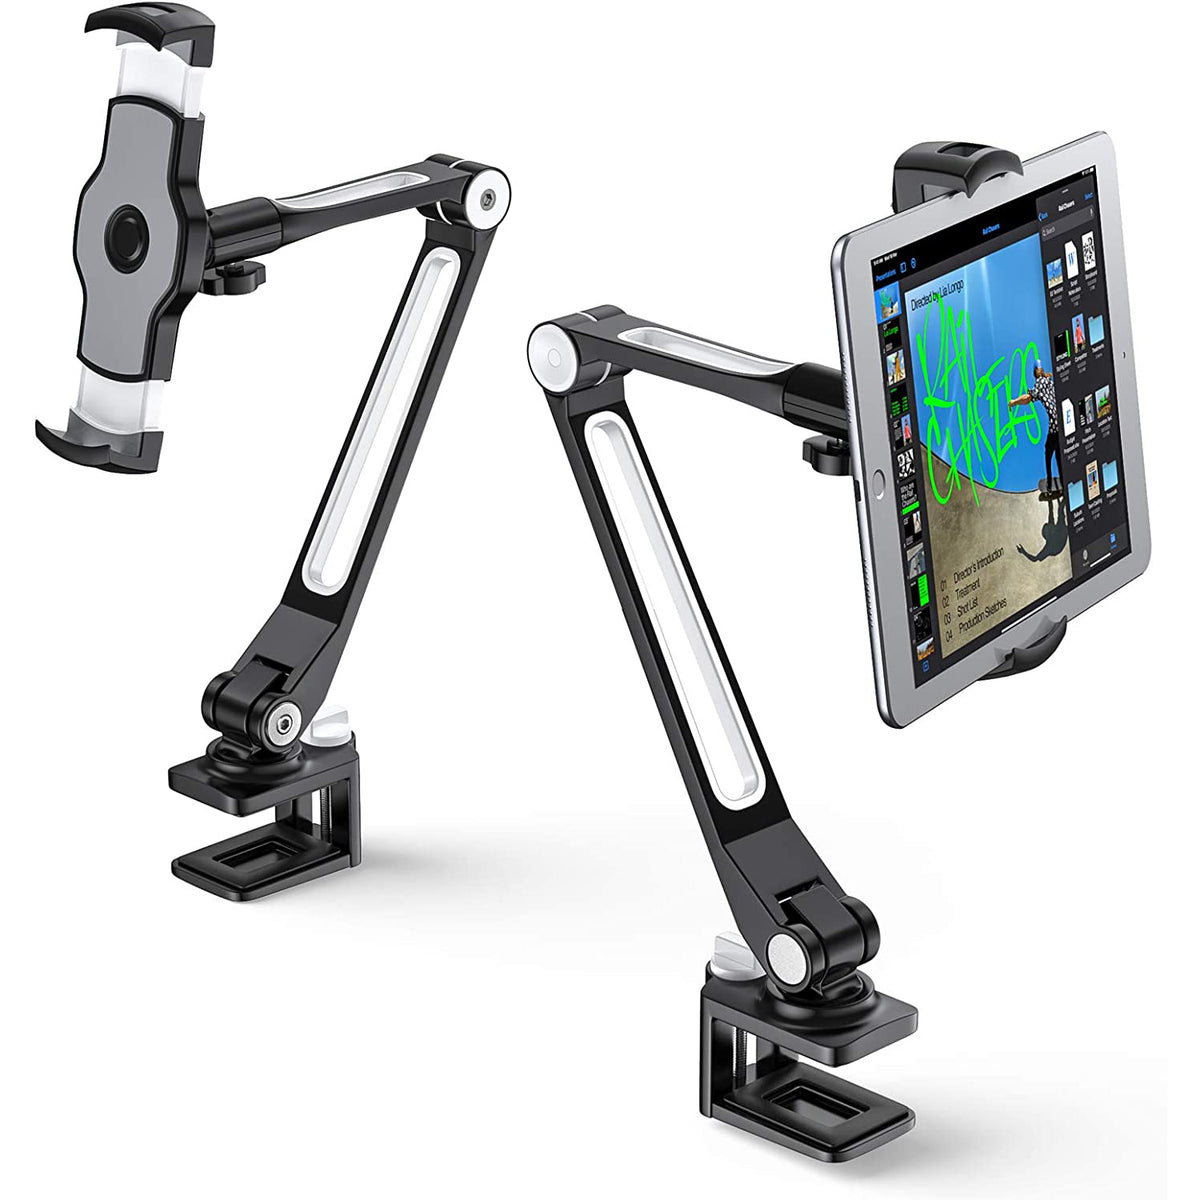 Black Extendable Smart Device Holder With Desk Clamp